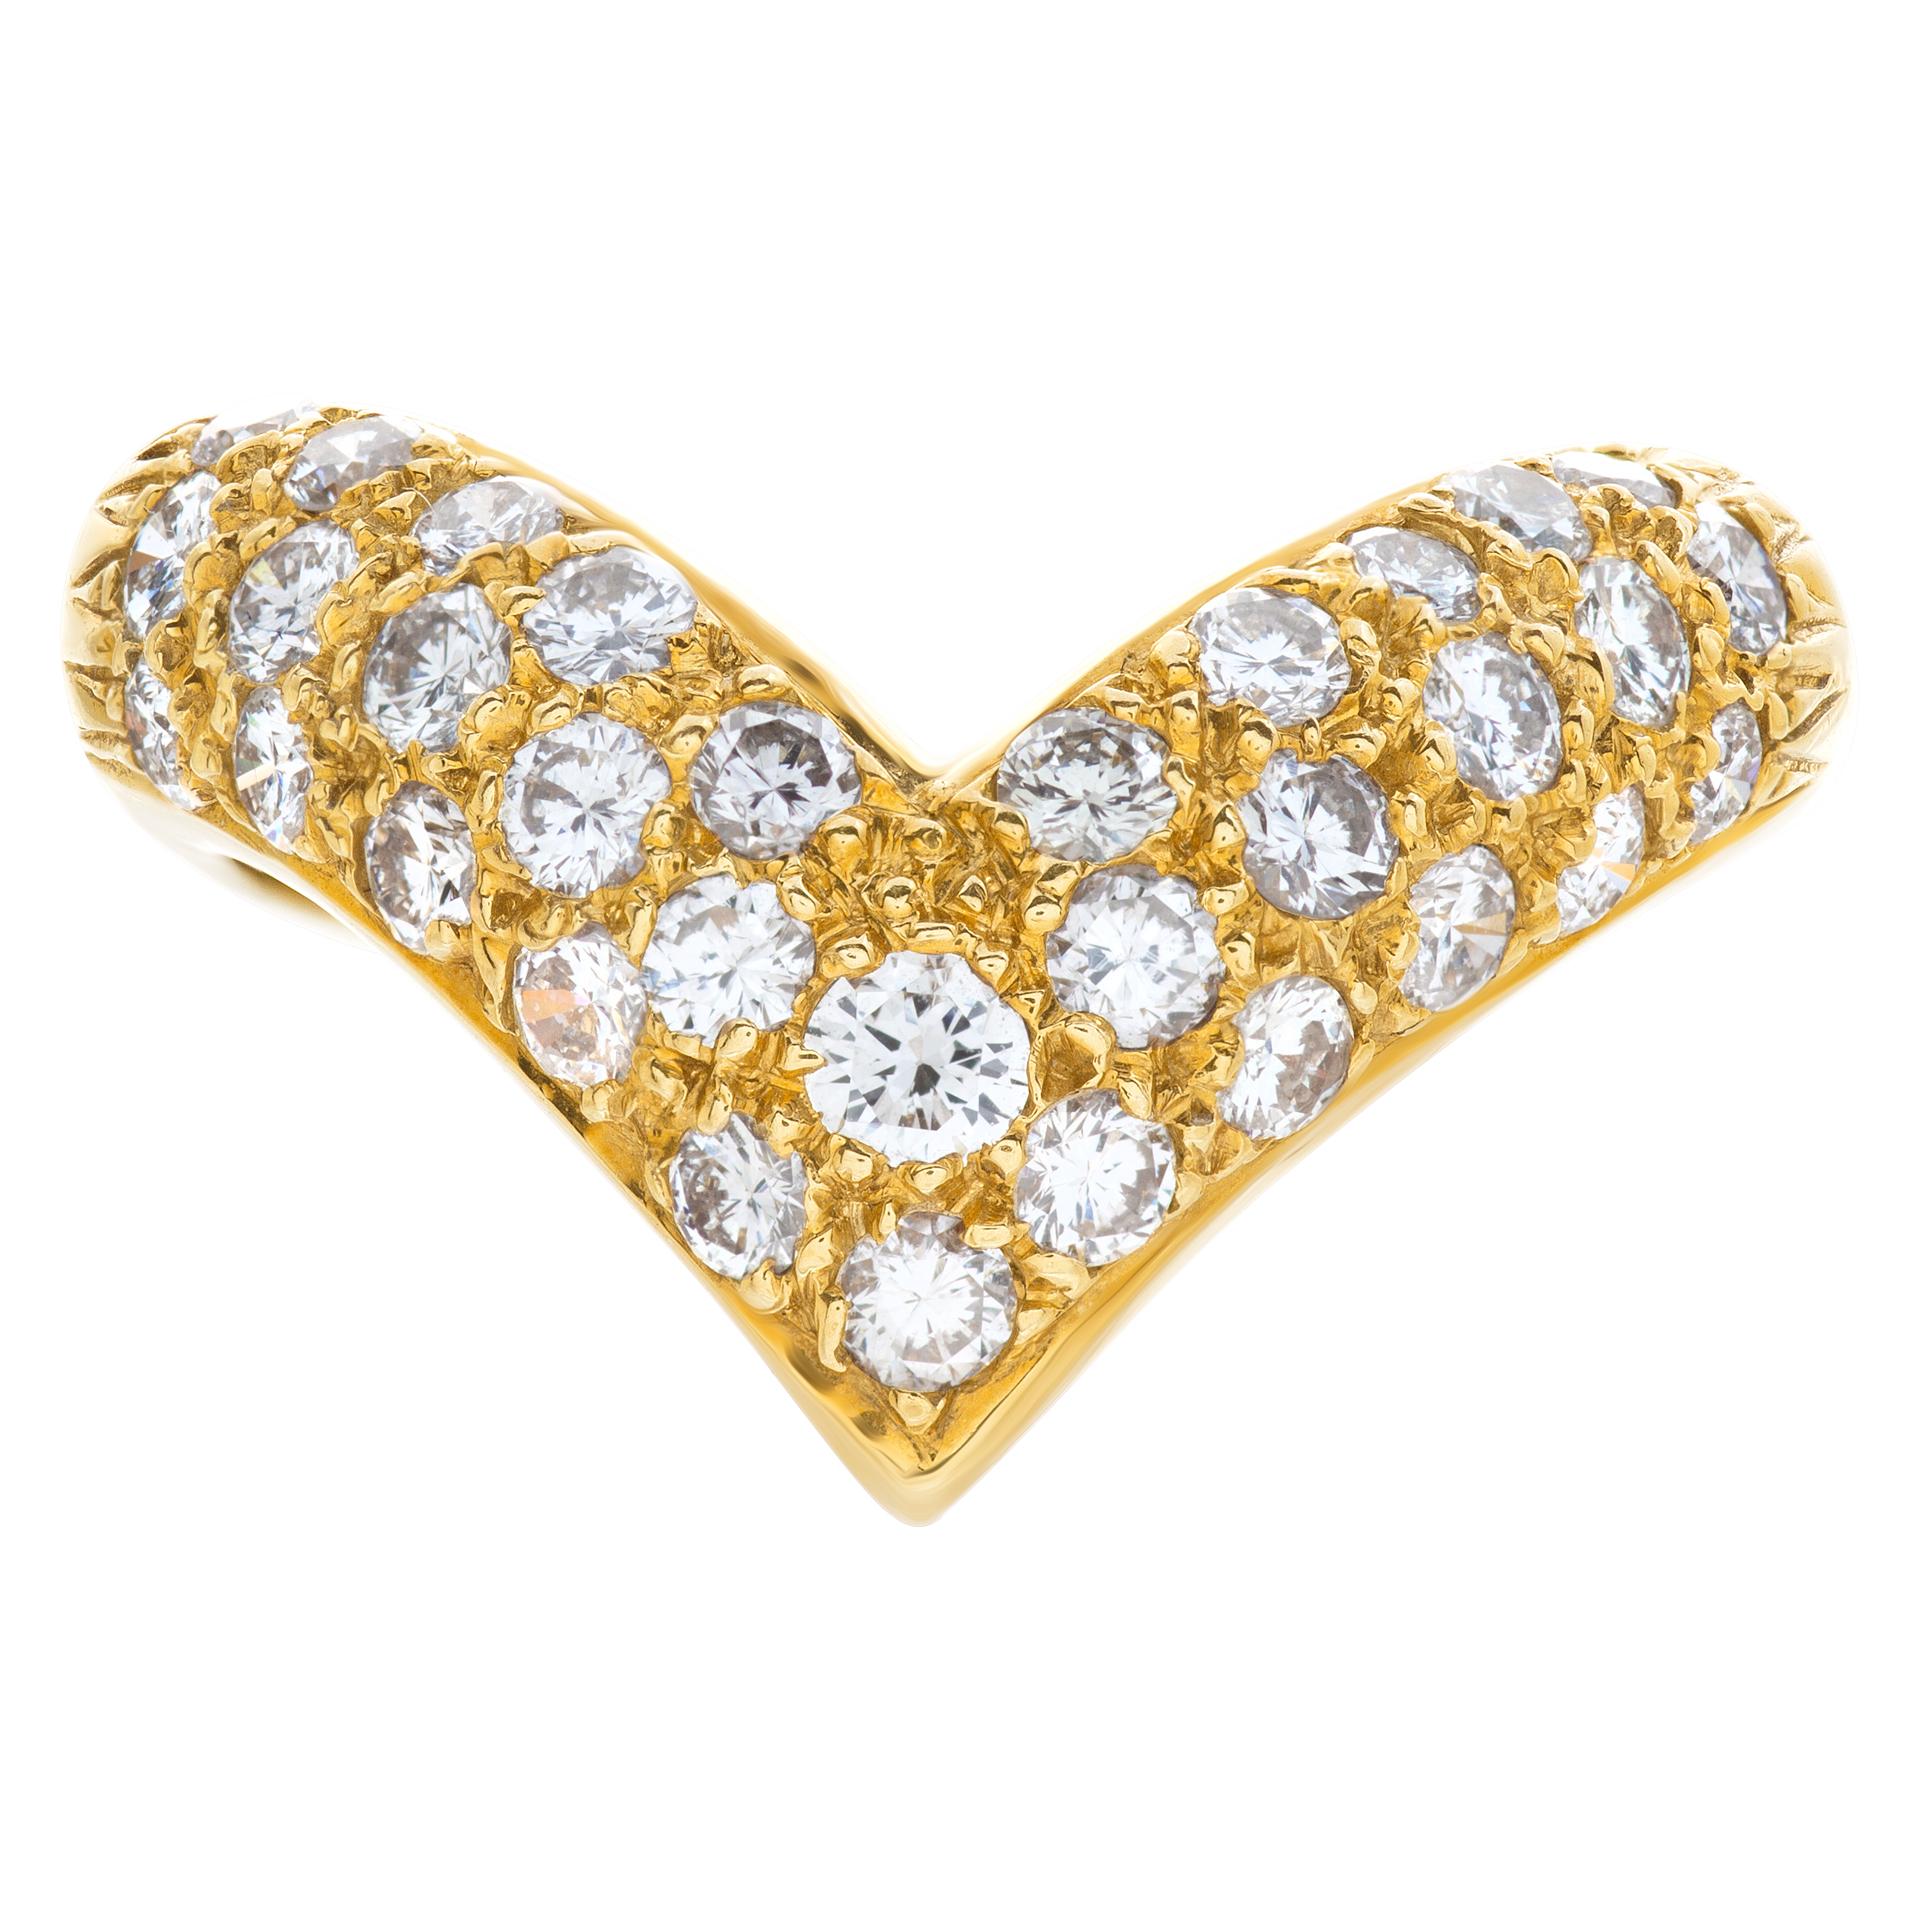 V shape pave diamond ring in 18k yellow gold. Full cut round brilliant diamonds approx. total weight: 1carat, estimate G-H color, VS clarity. diamonds. Size 6.5  This Diamond ring is currently size 6.5 and some items can be sized up or down, please